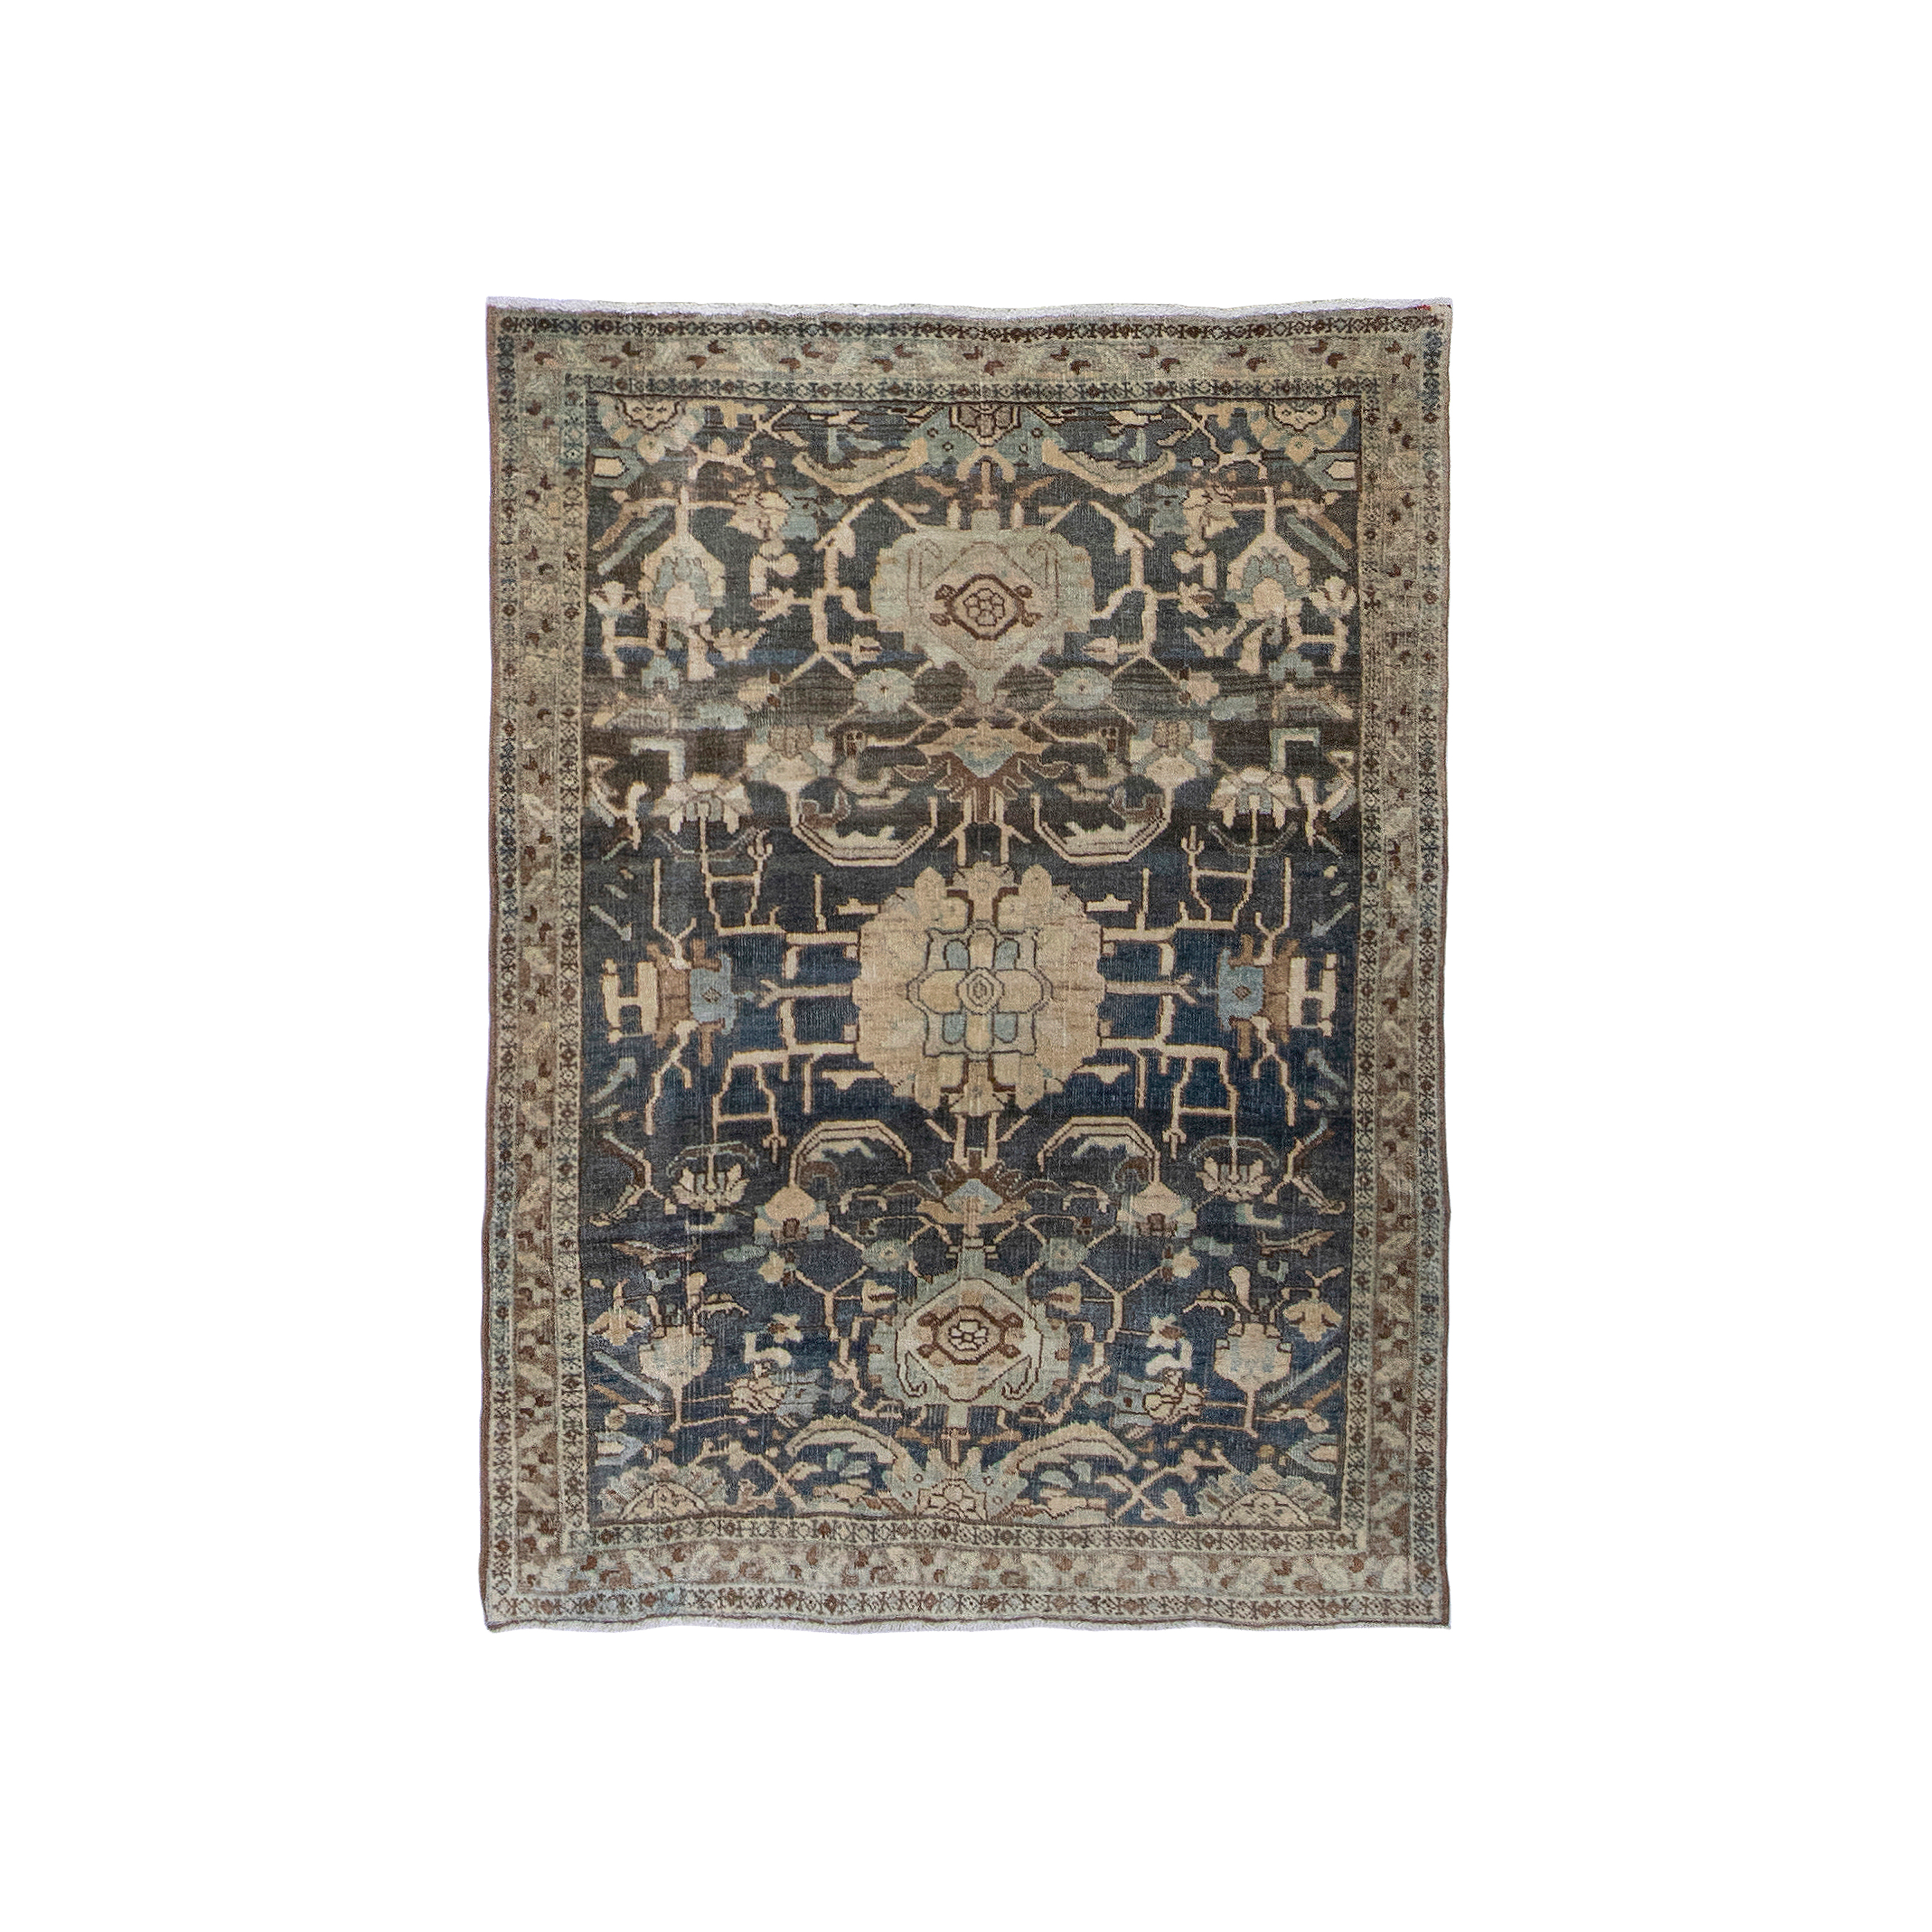 Tabriz is an antique rug made from handspun wool, resembling ancient weaving techniques and patterns. 